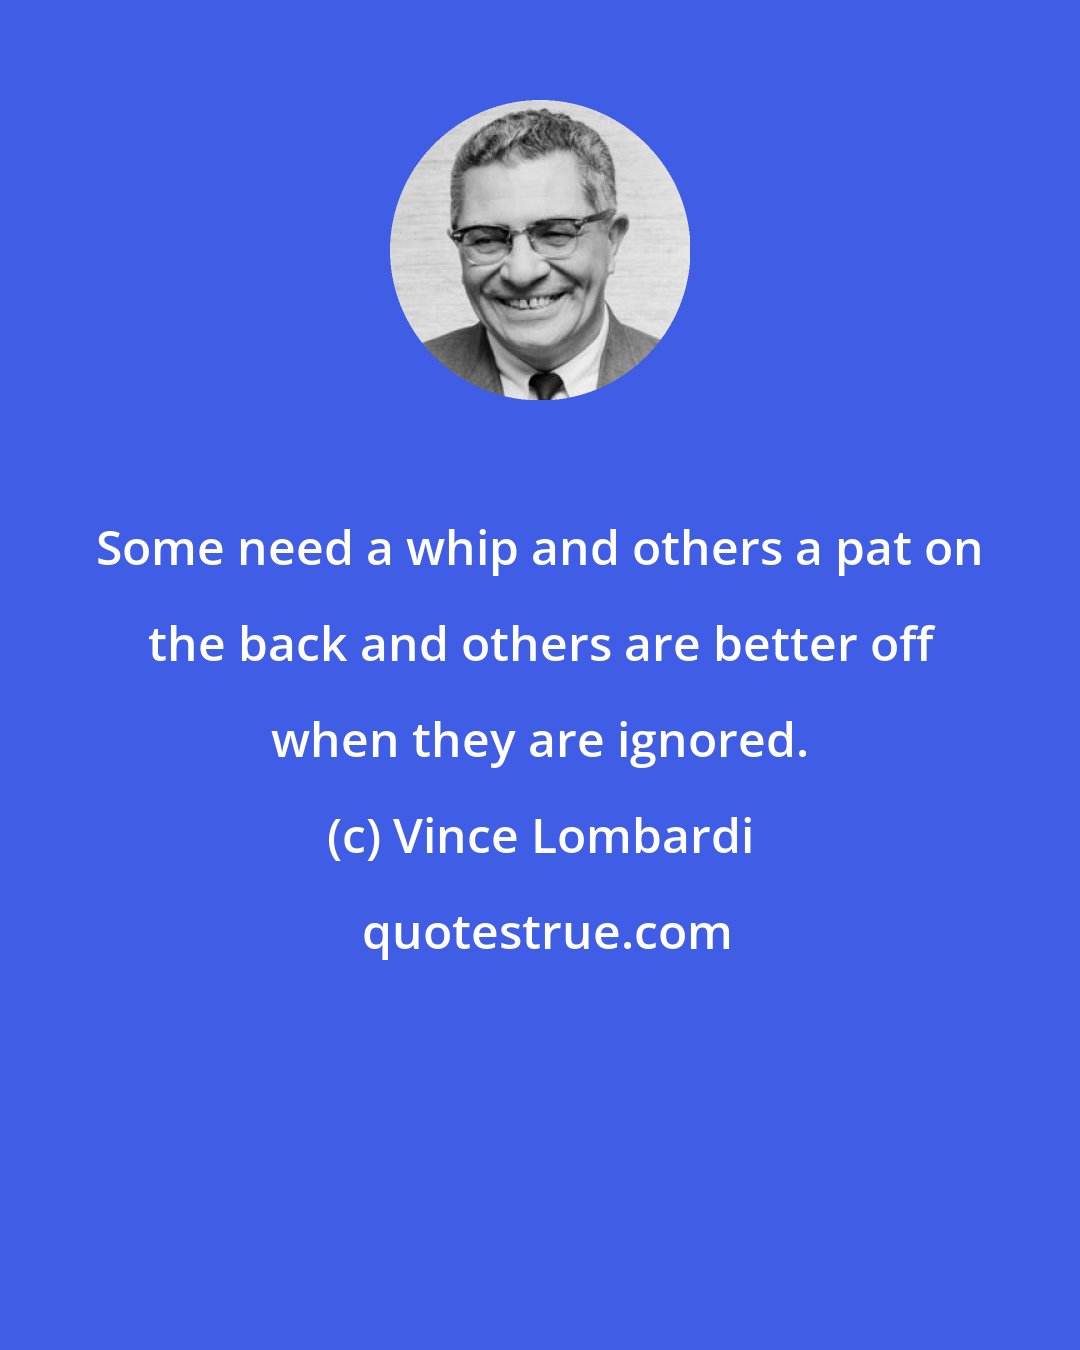 Vince Lombardi: Some need a whip and others a pat on the back and others are better off when they are ignored.